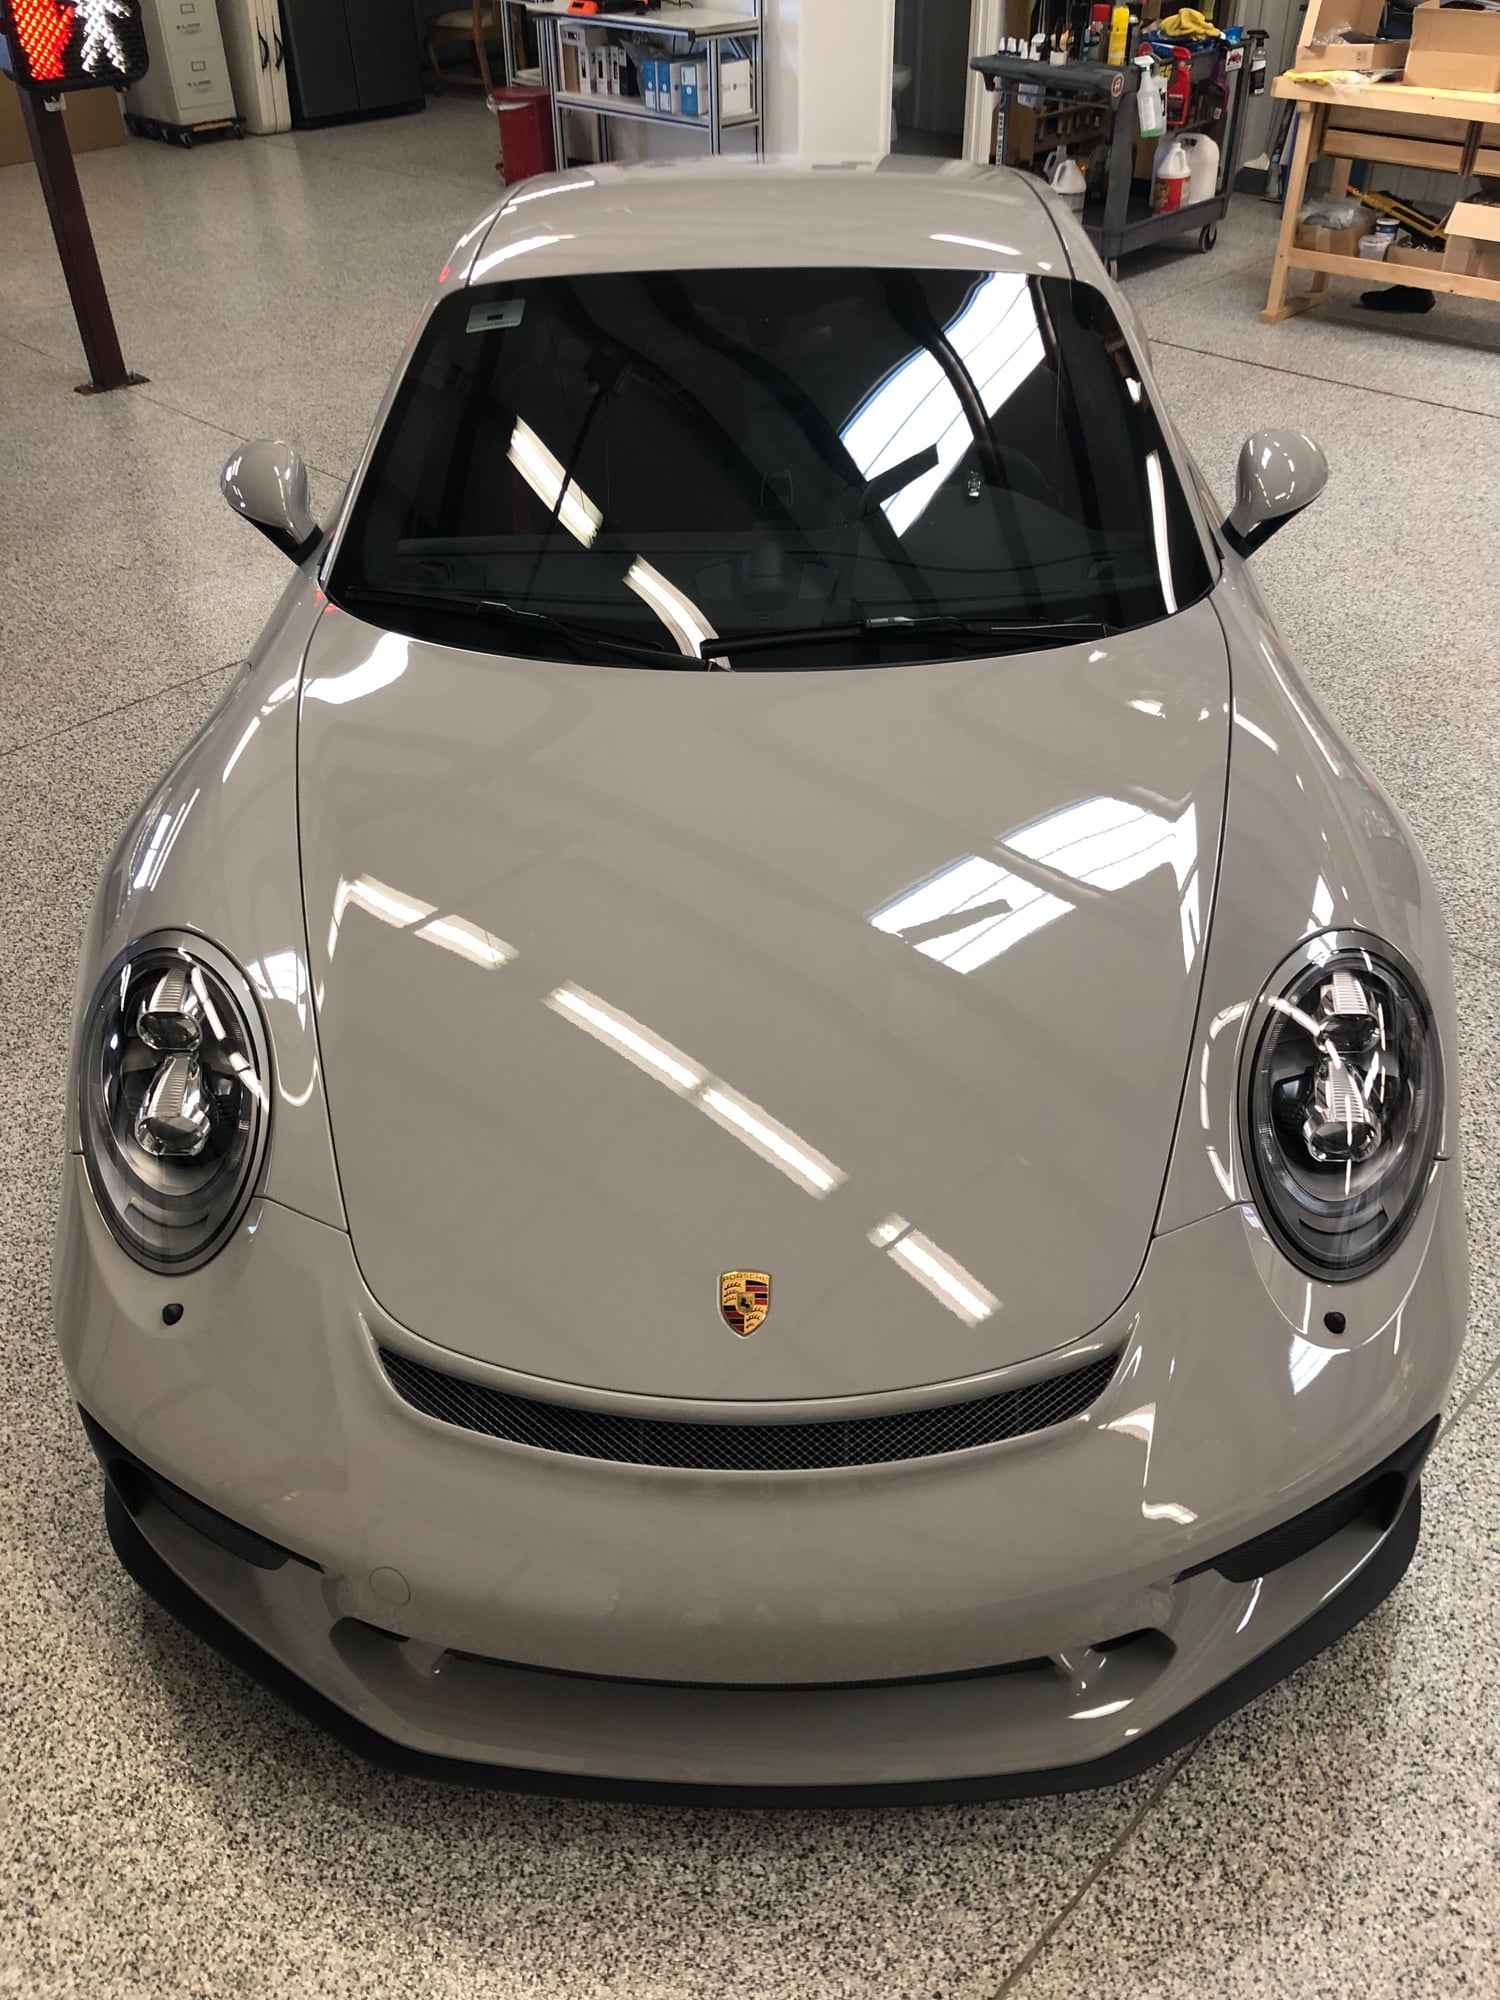 2018 Porsche GT3 - 2018 911 Chalk GT3 Touring SOLD - Used - VIN wp0ac2a92js176977 - 5,450 Miles - 6 cyl - 2WD - Automatic - Coupe - Other - Mesa, AZ 85205, United States